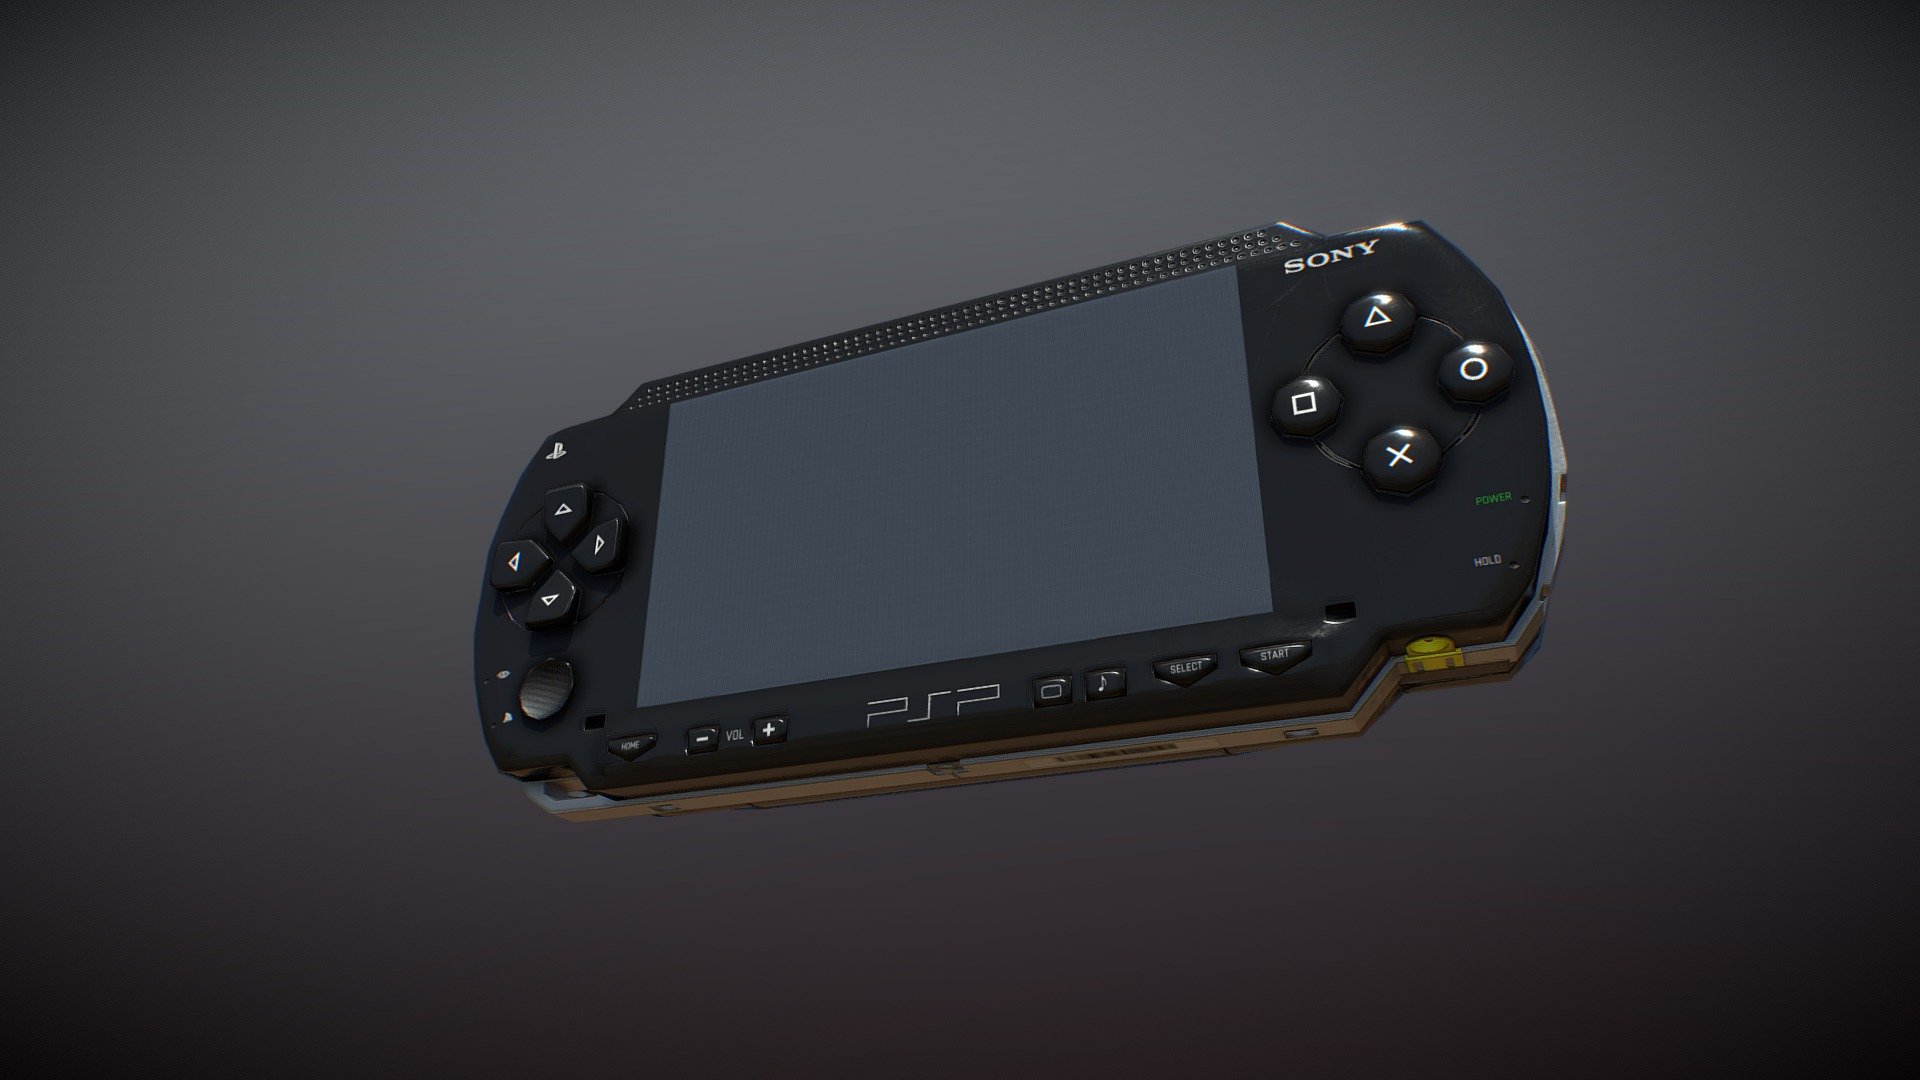 Low poly Model for the Portable Playstation handheld device medol 1000.
I used Cinema4D for Modeling and UV unwrapping.
Then Substance Painted for the texture 3d model